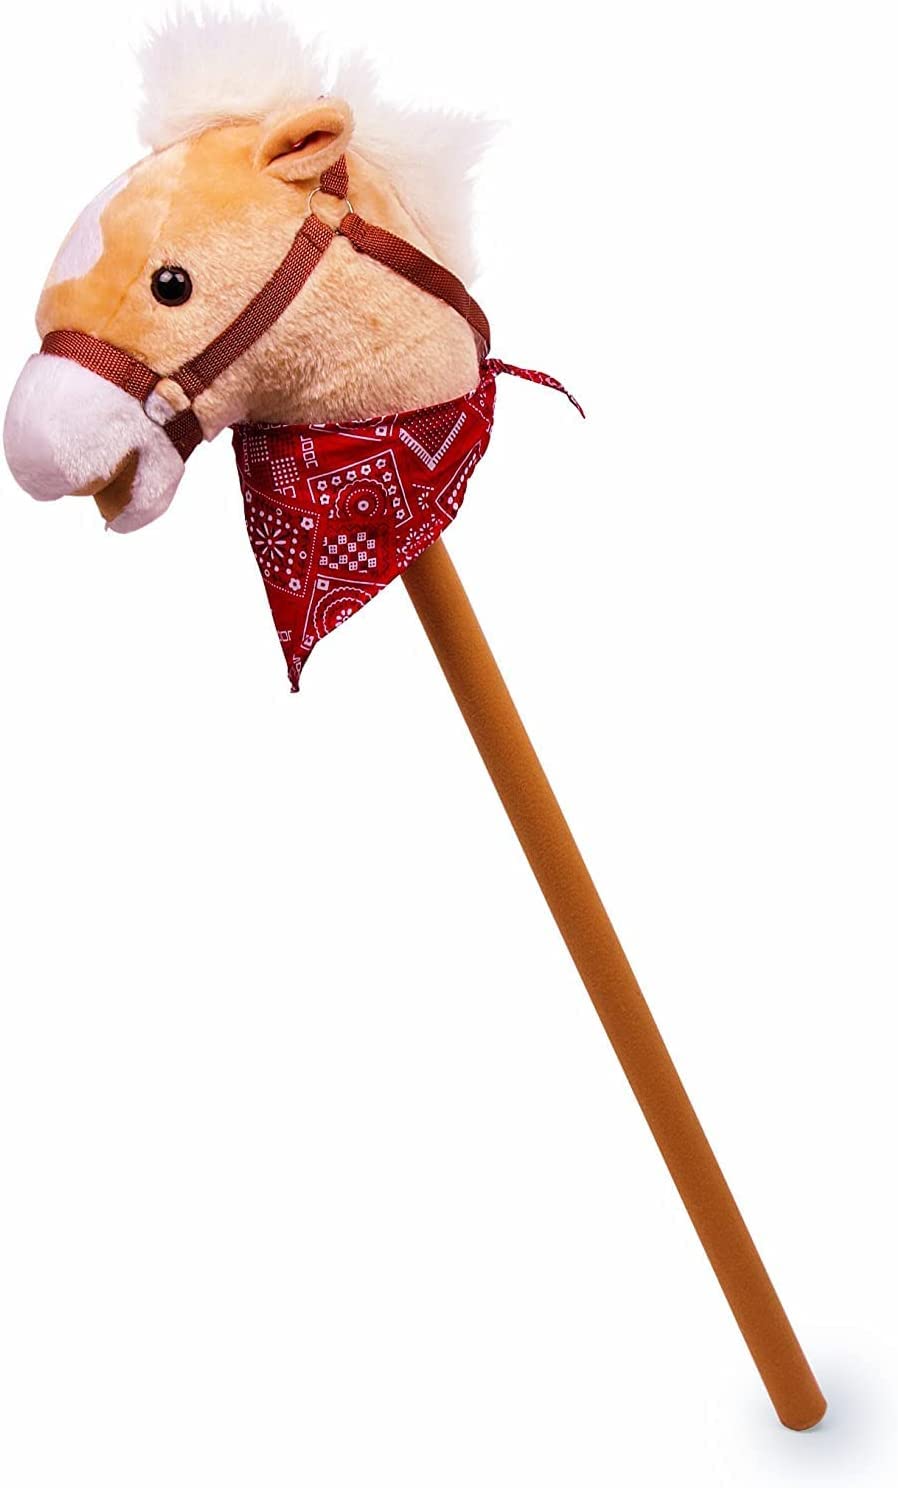 small foot wooden toys Small Foot Toys Hobby Horse Rocky with Sound Designed for Children Ages 3+ Years (4151)